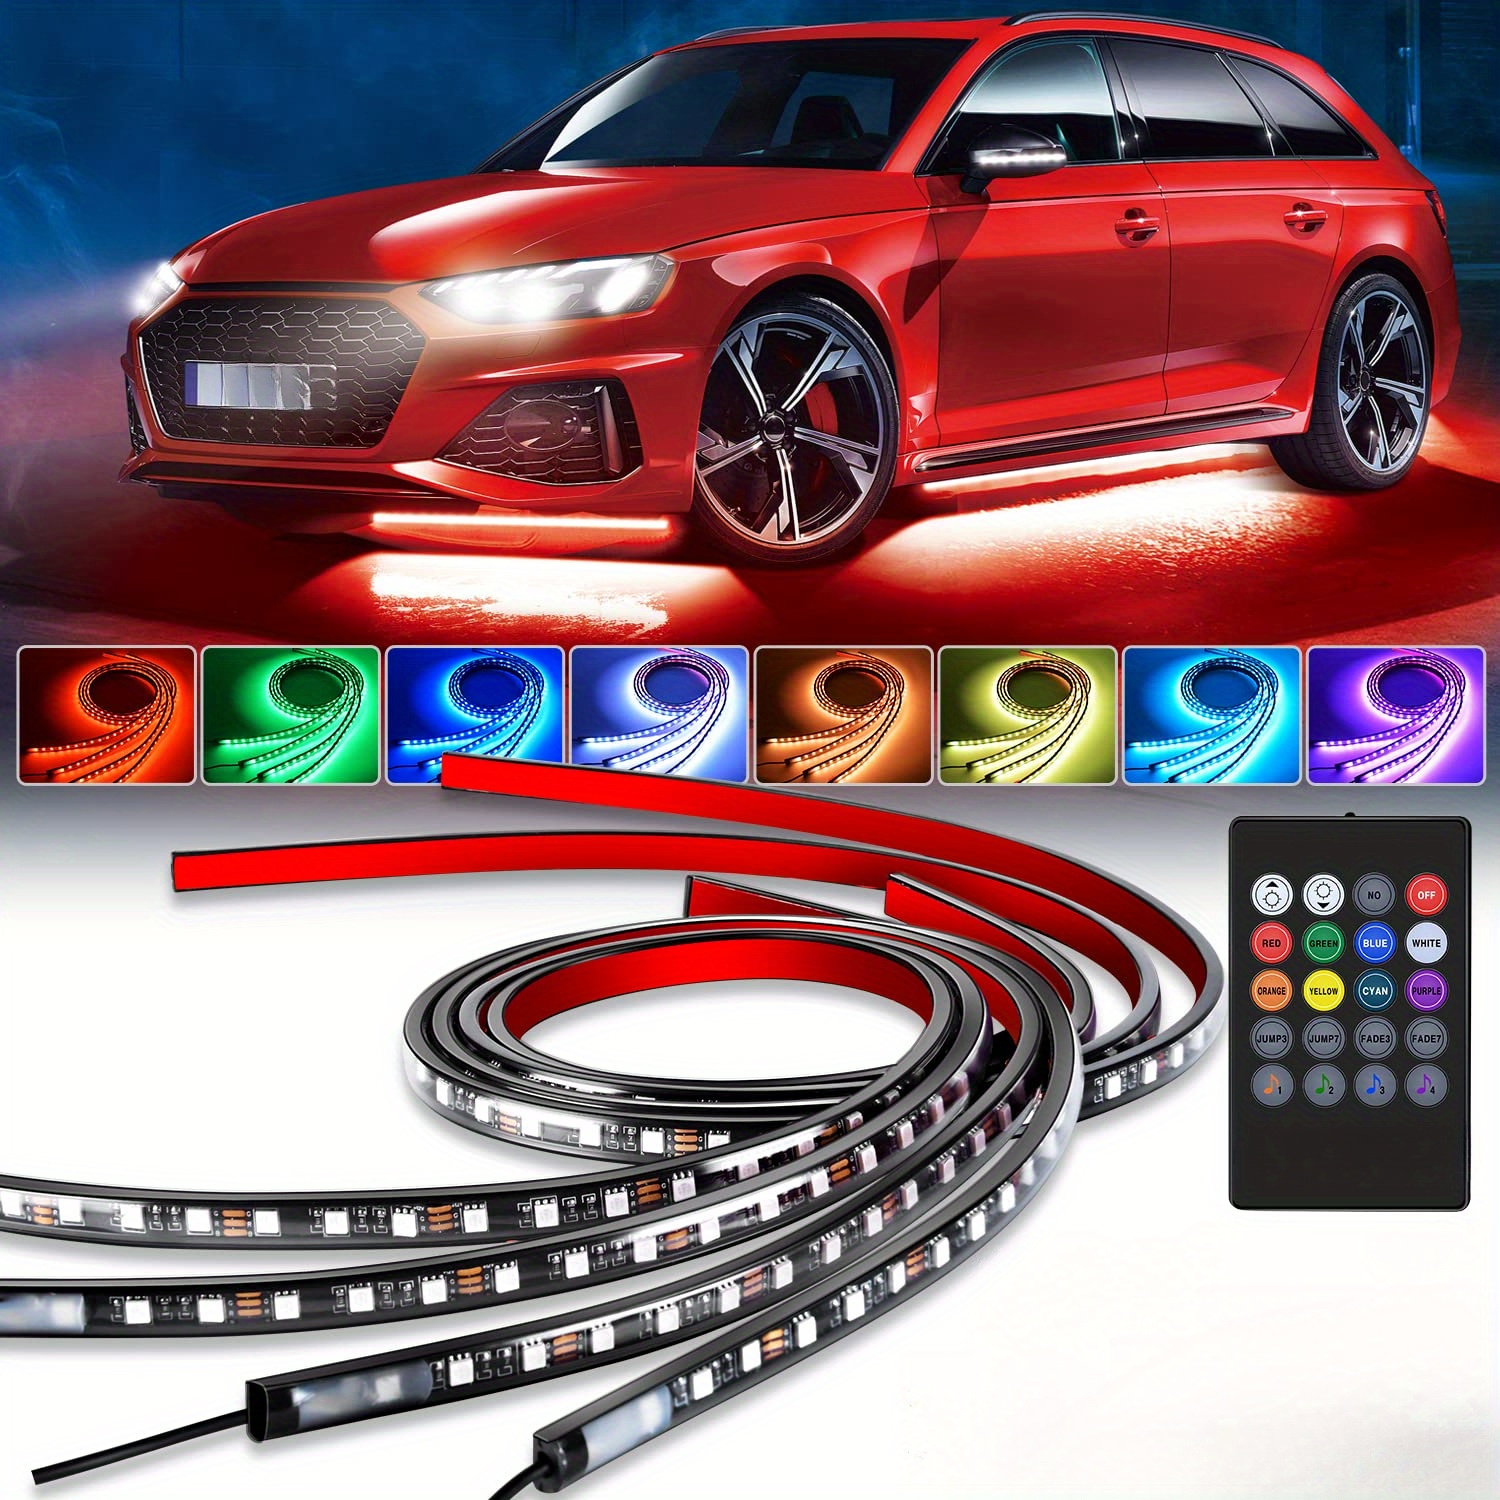 

4-piece Led Underbody Car Light Kit - 12v Rgb Neon Strips, Remote Control Compatible, Multi-color Ambient Lights For Vehicles